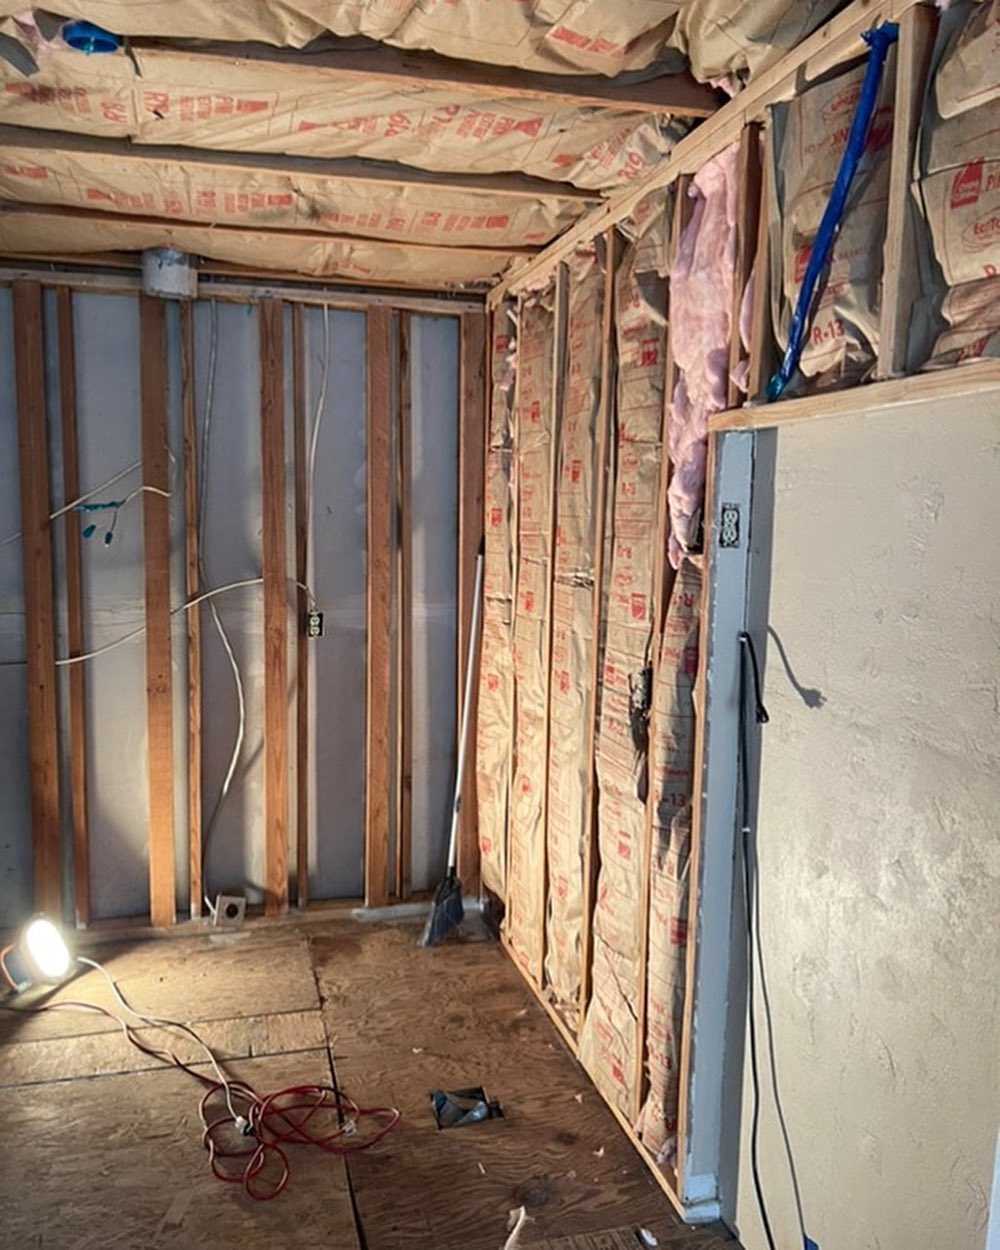 A partially renovated room with exposed wall studs and insulation, electrical wiring, a work light, and a broom shows signs of water damage restoration. Some areas of the wall remain unfinished.